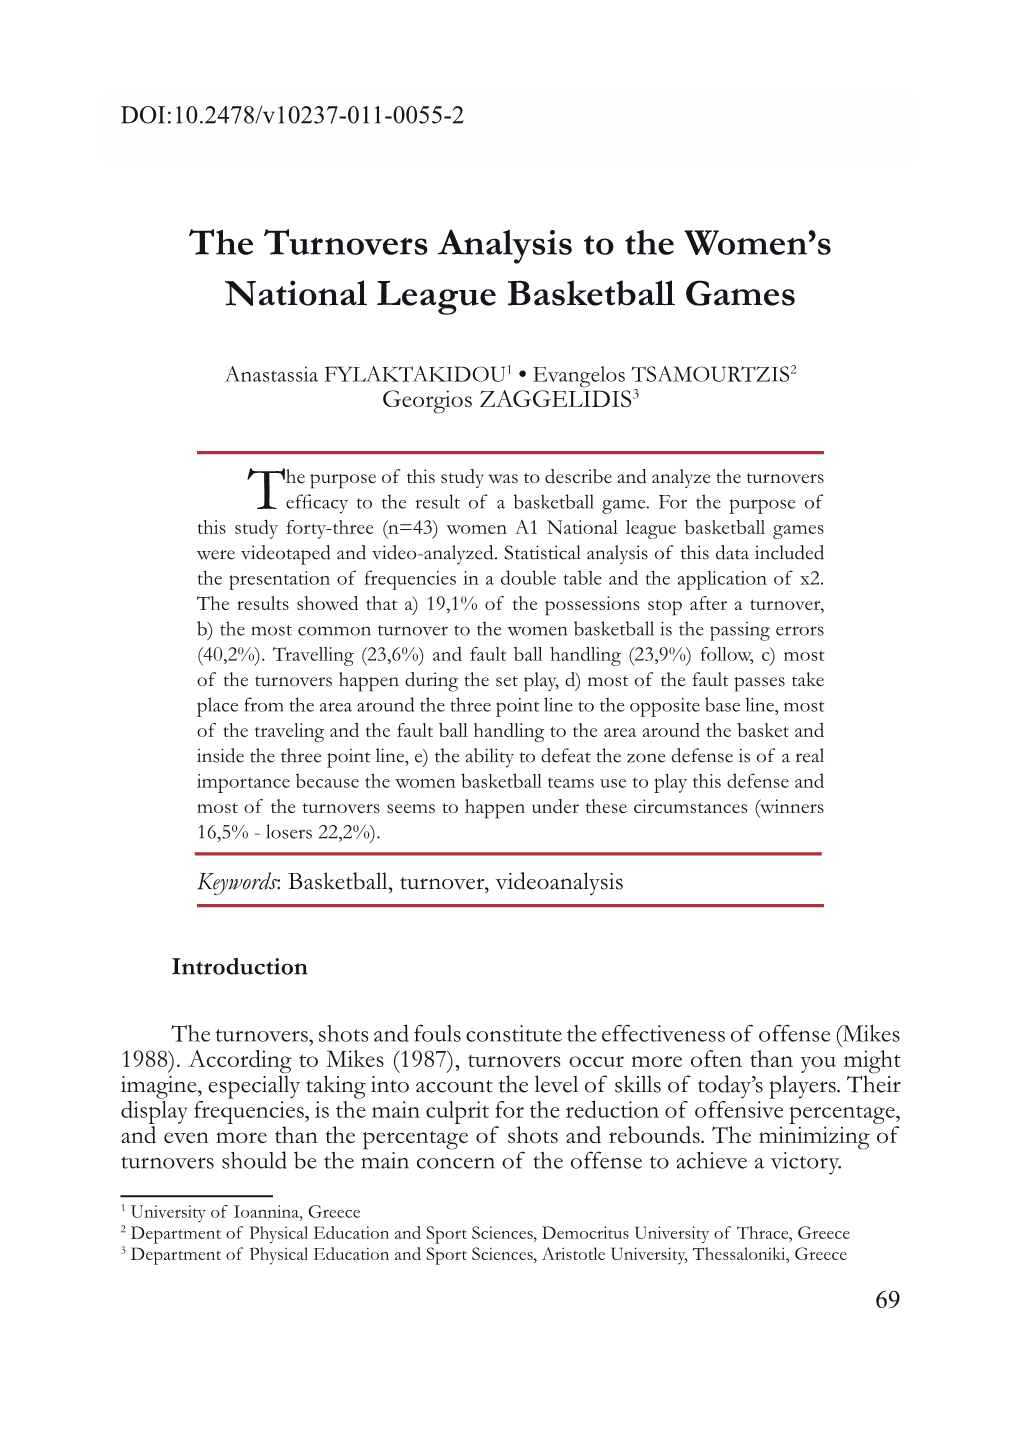 The Turnovers Analysis to the Women's National League